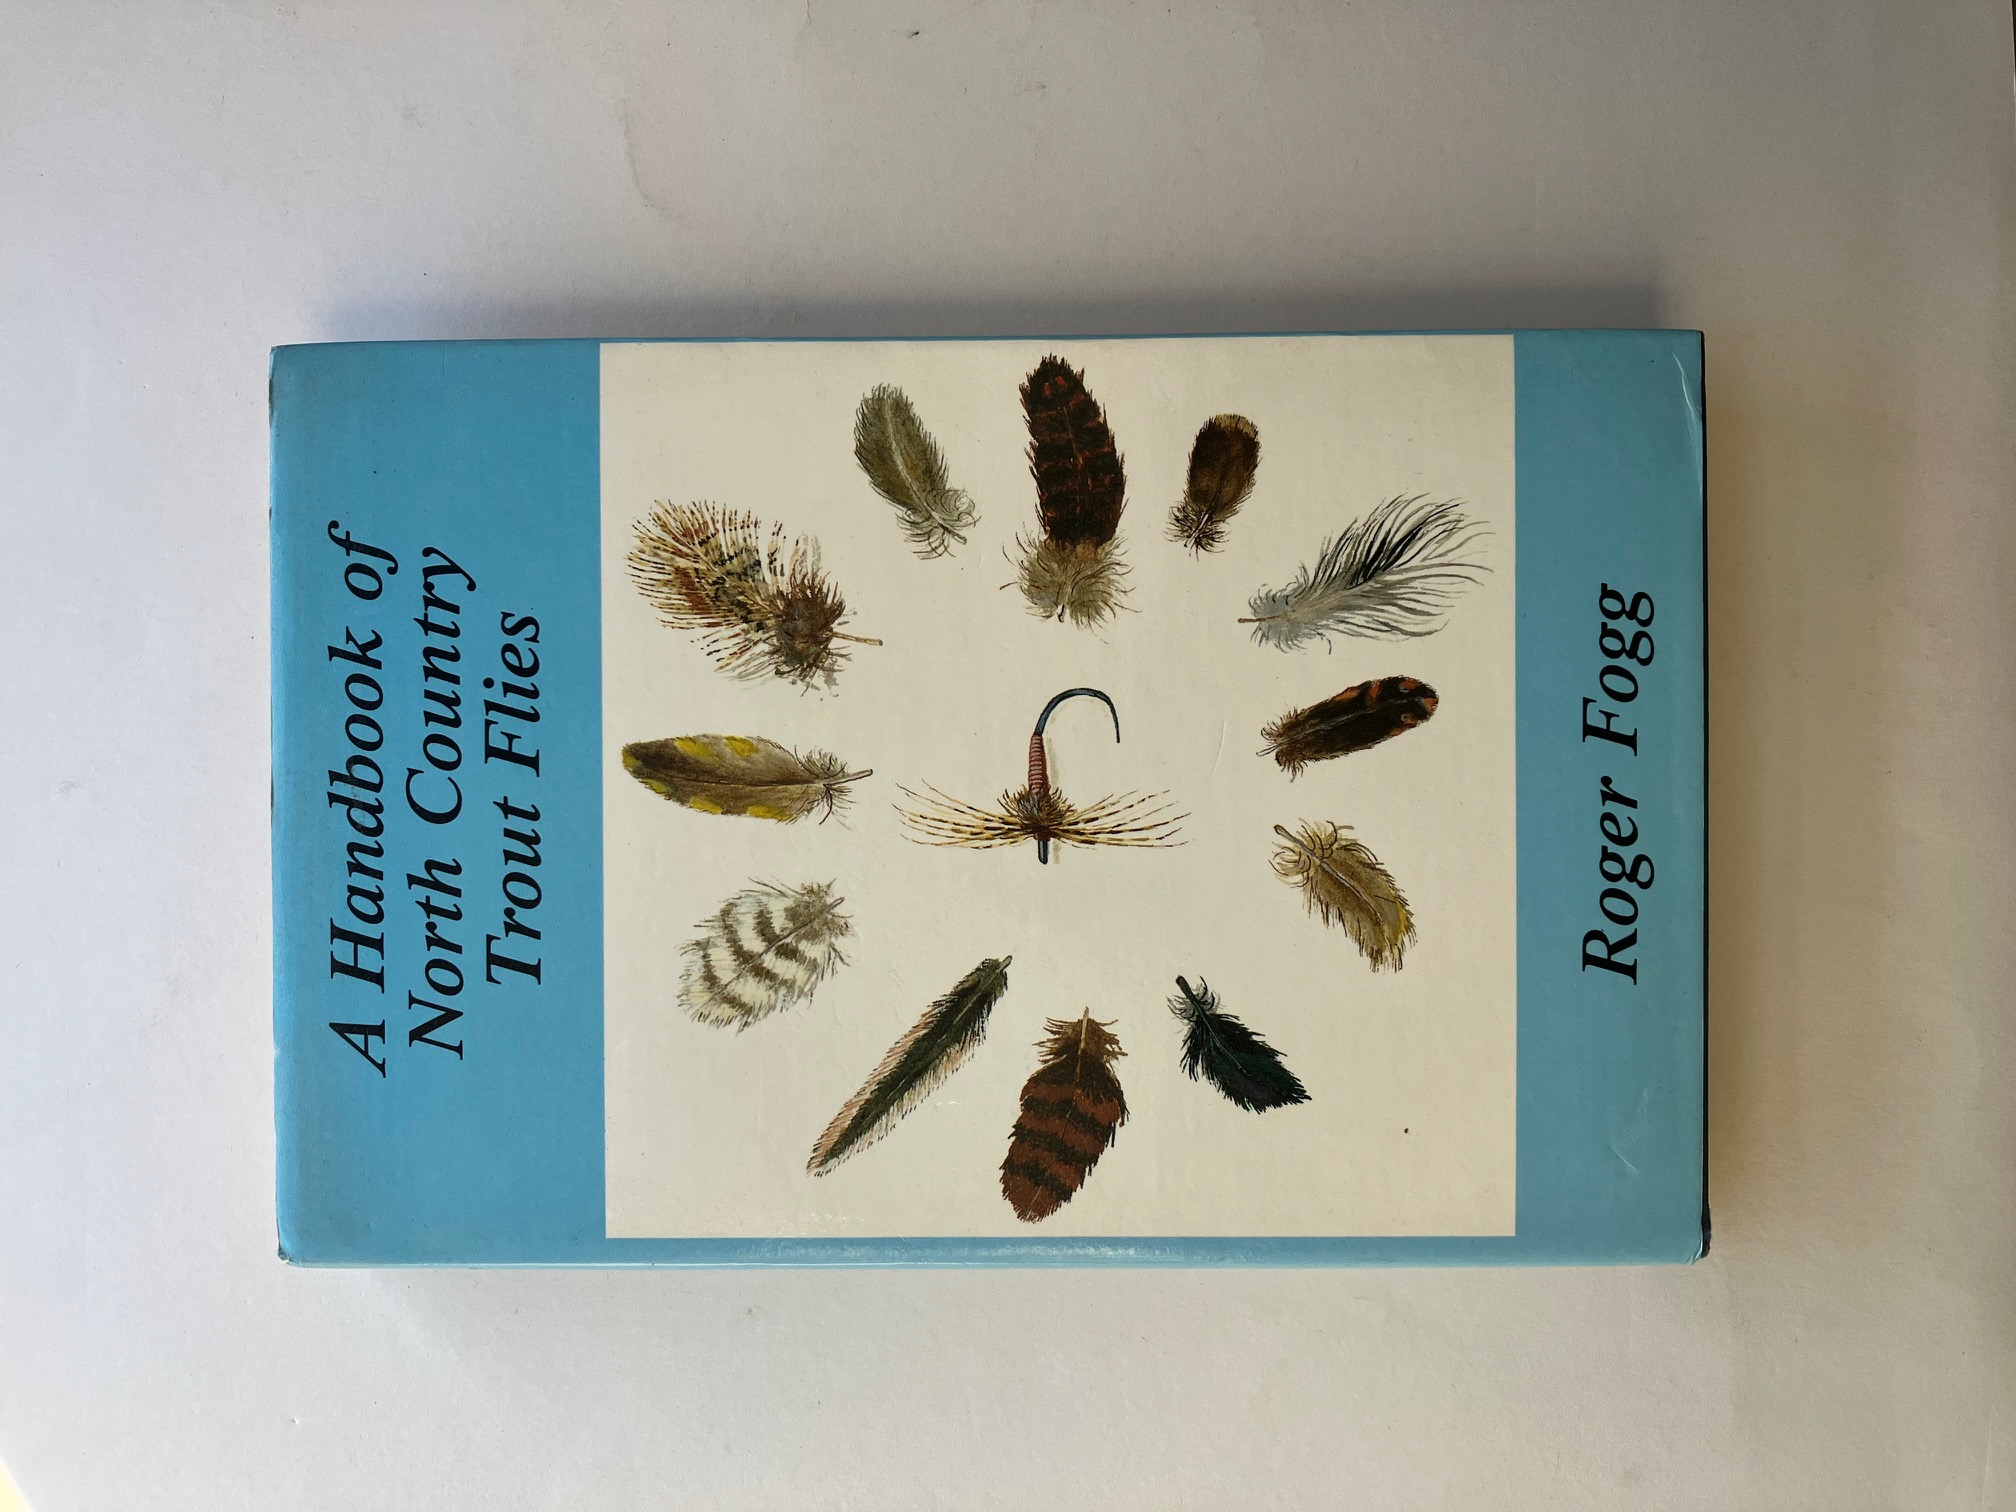 A Handbook of North Country Trout Flies